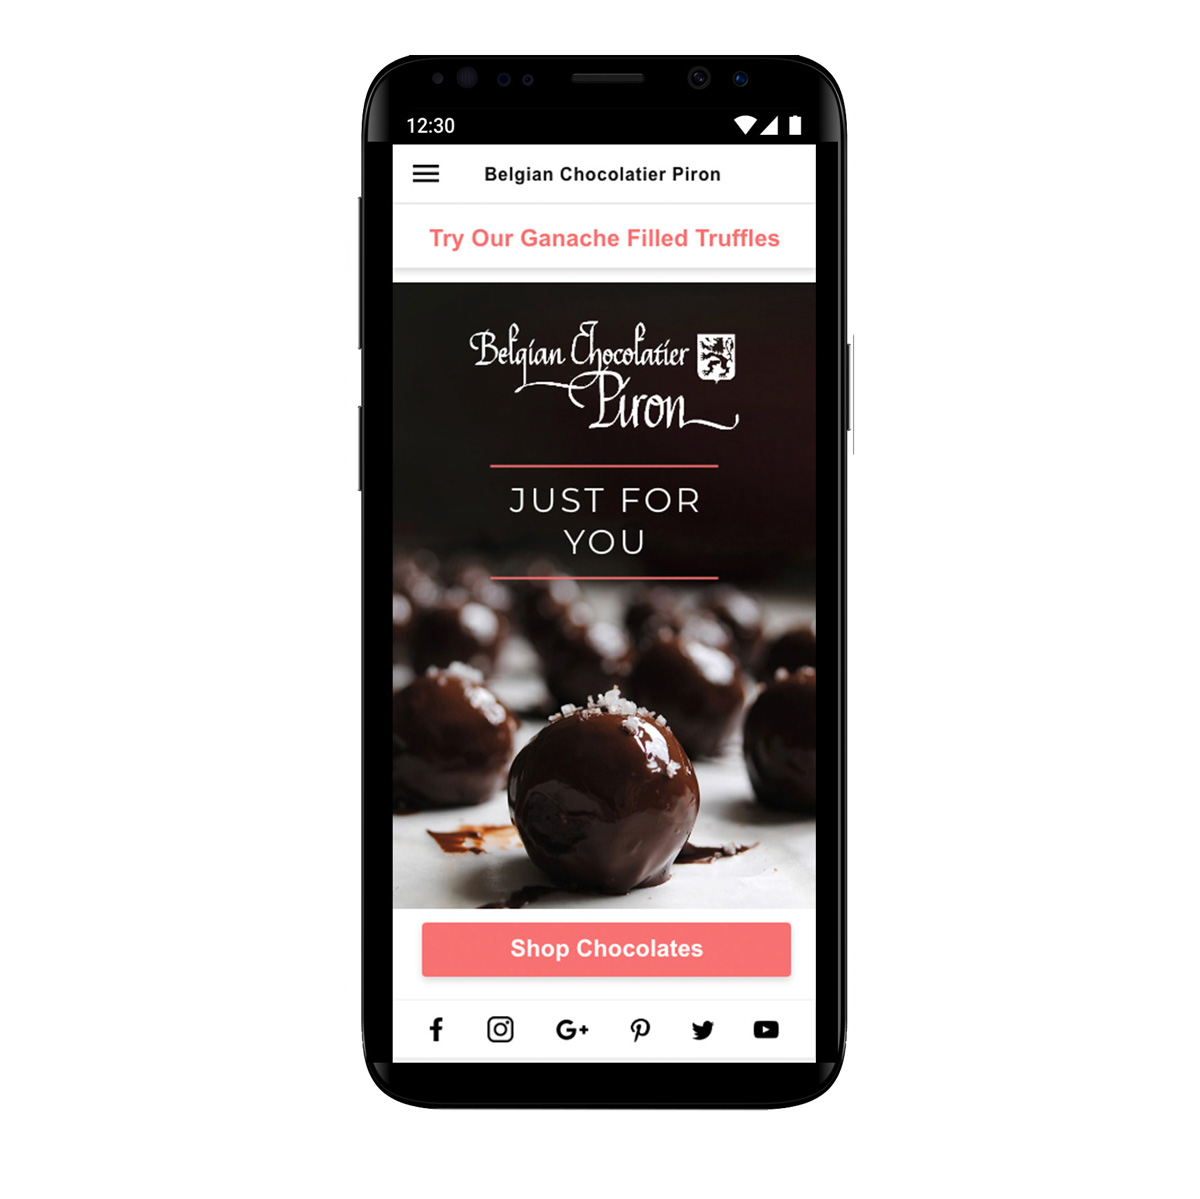 Piron Chocolates: Information Architecture and Content Strategy